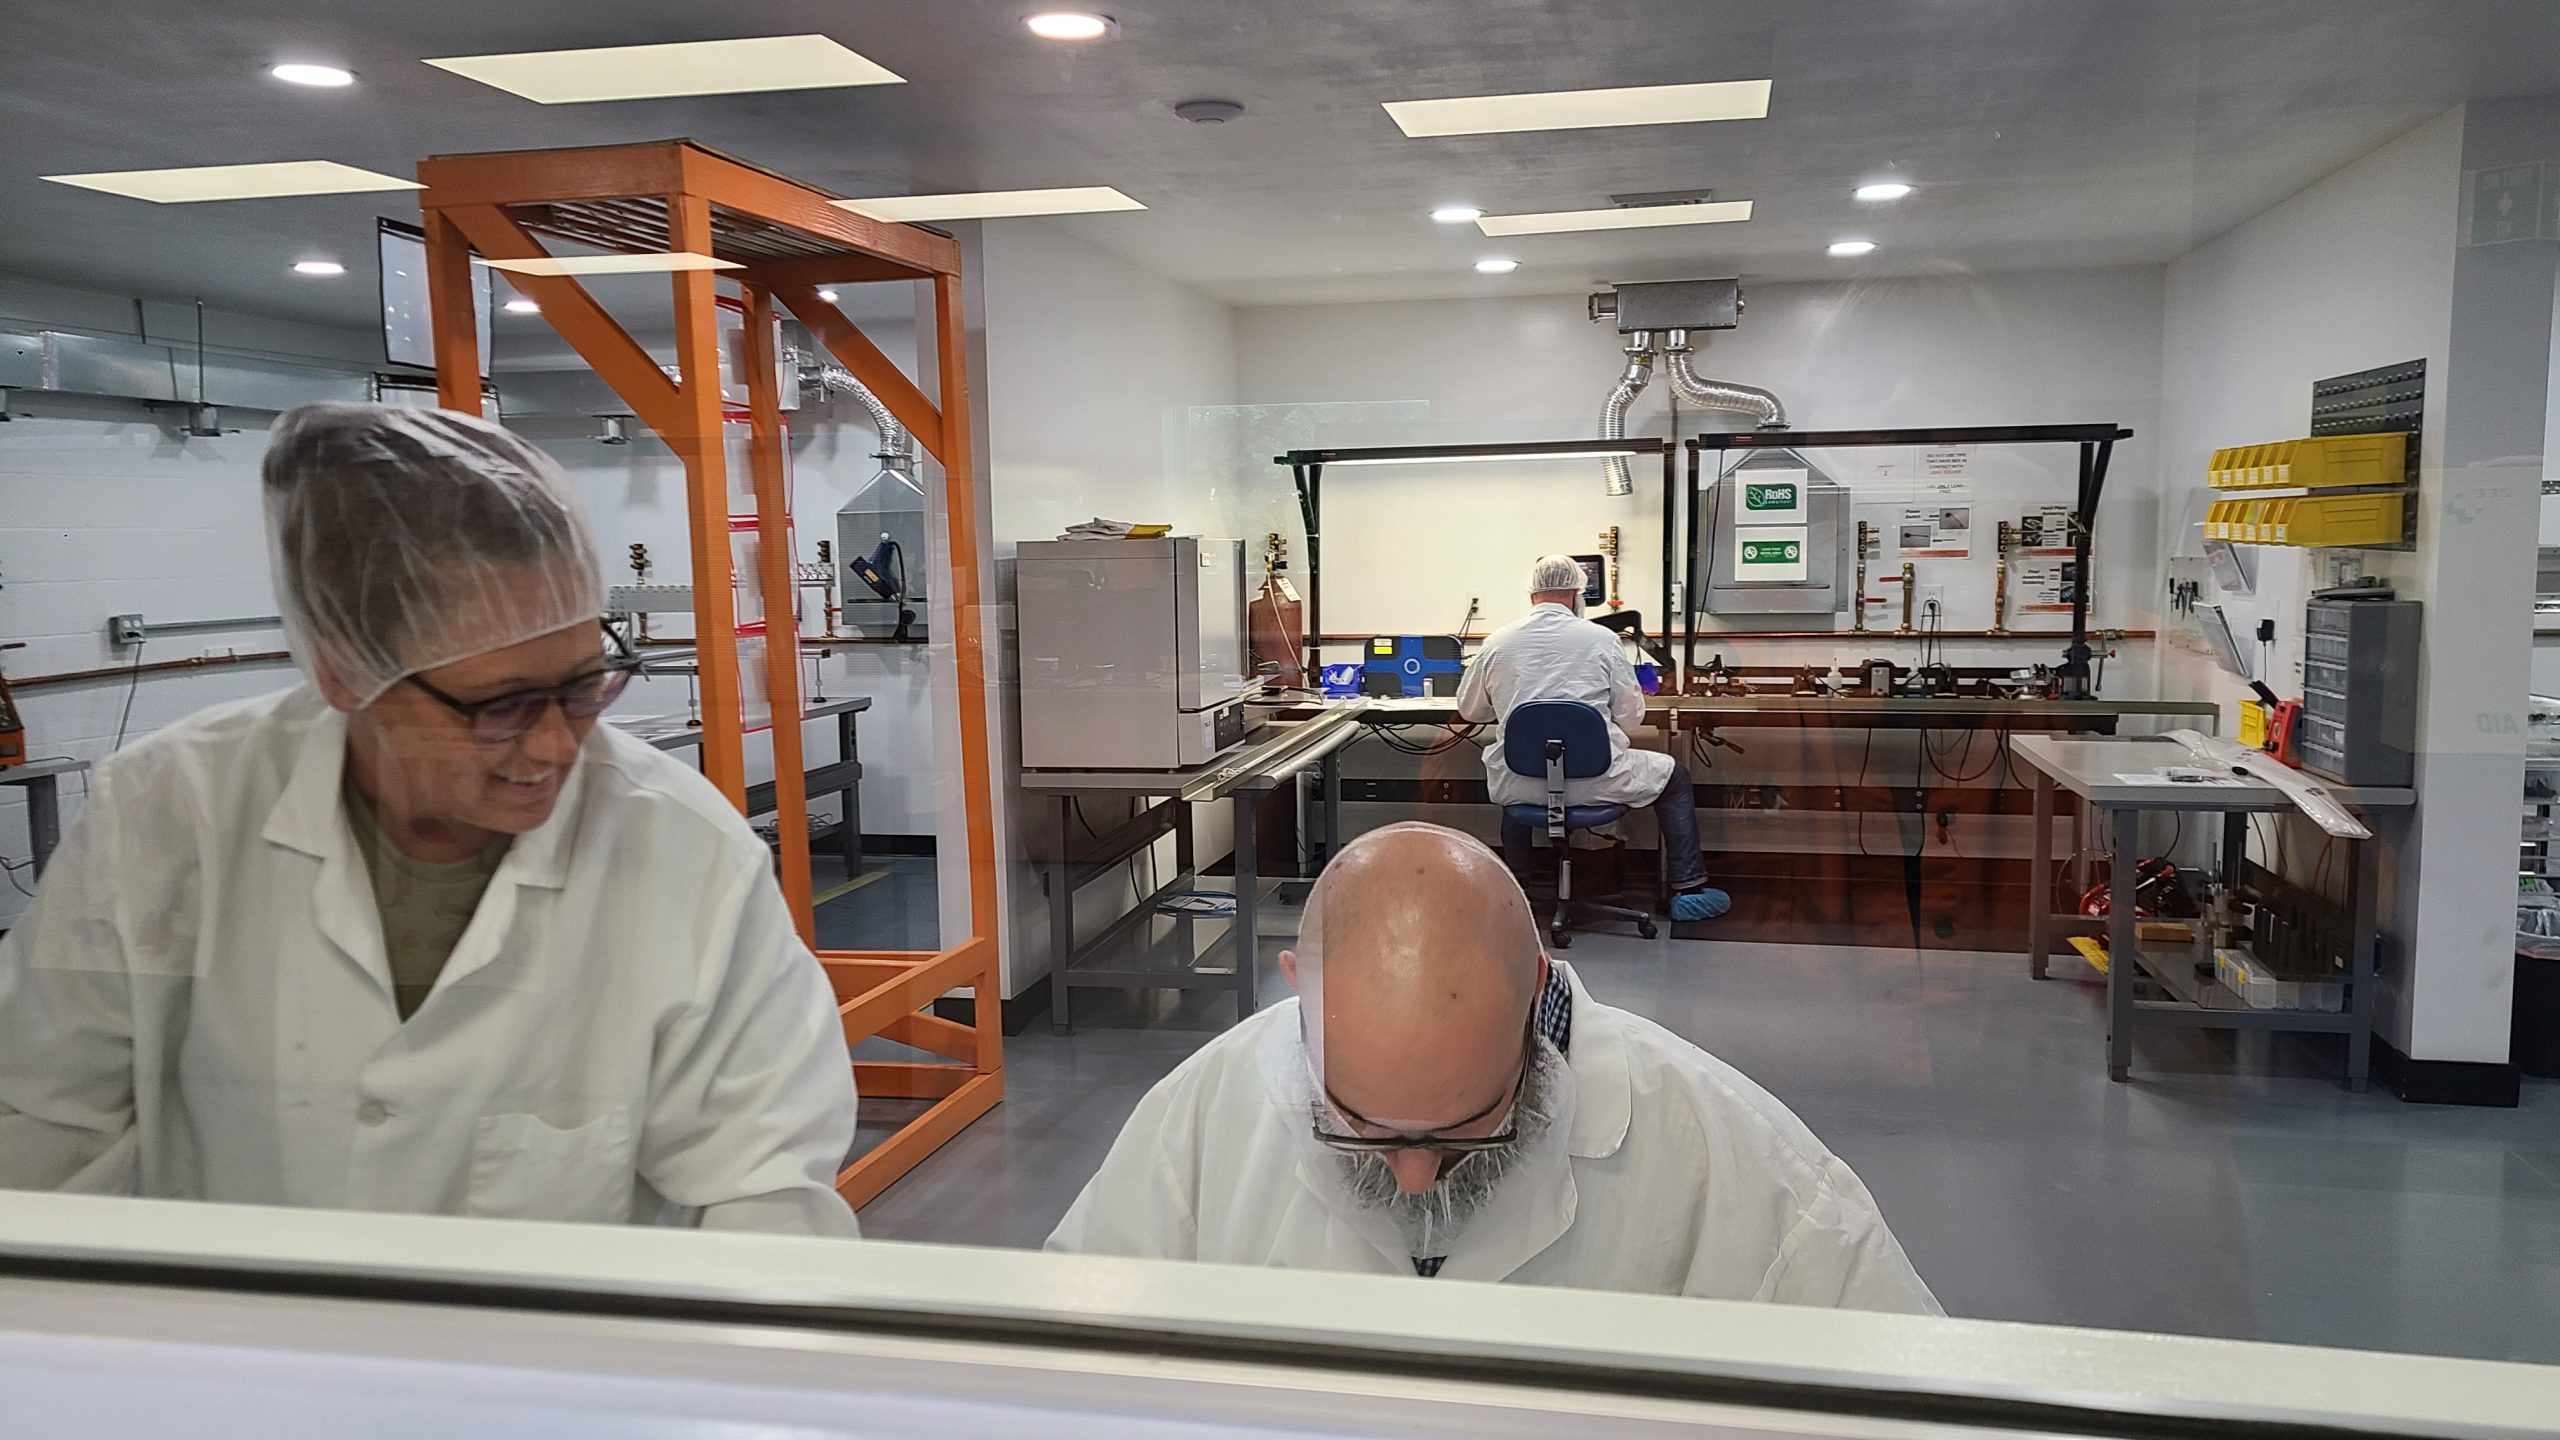 FDA Compliant Controlled Manufacturing Room